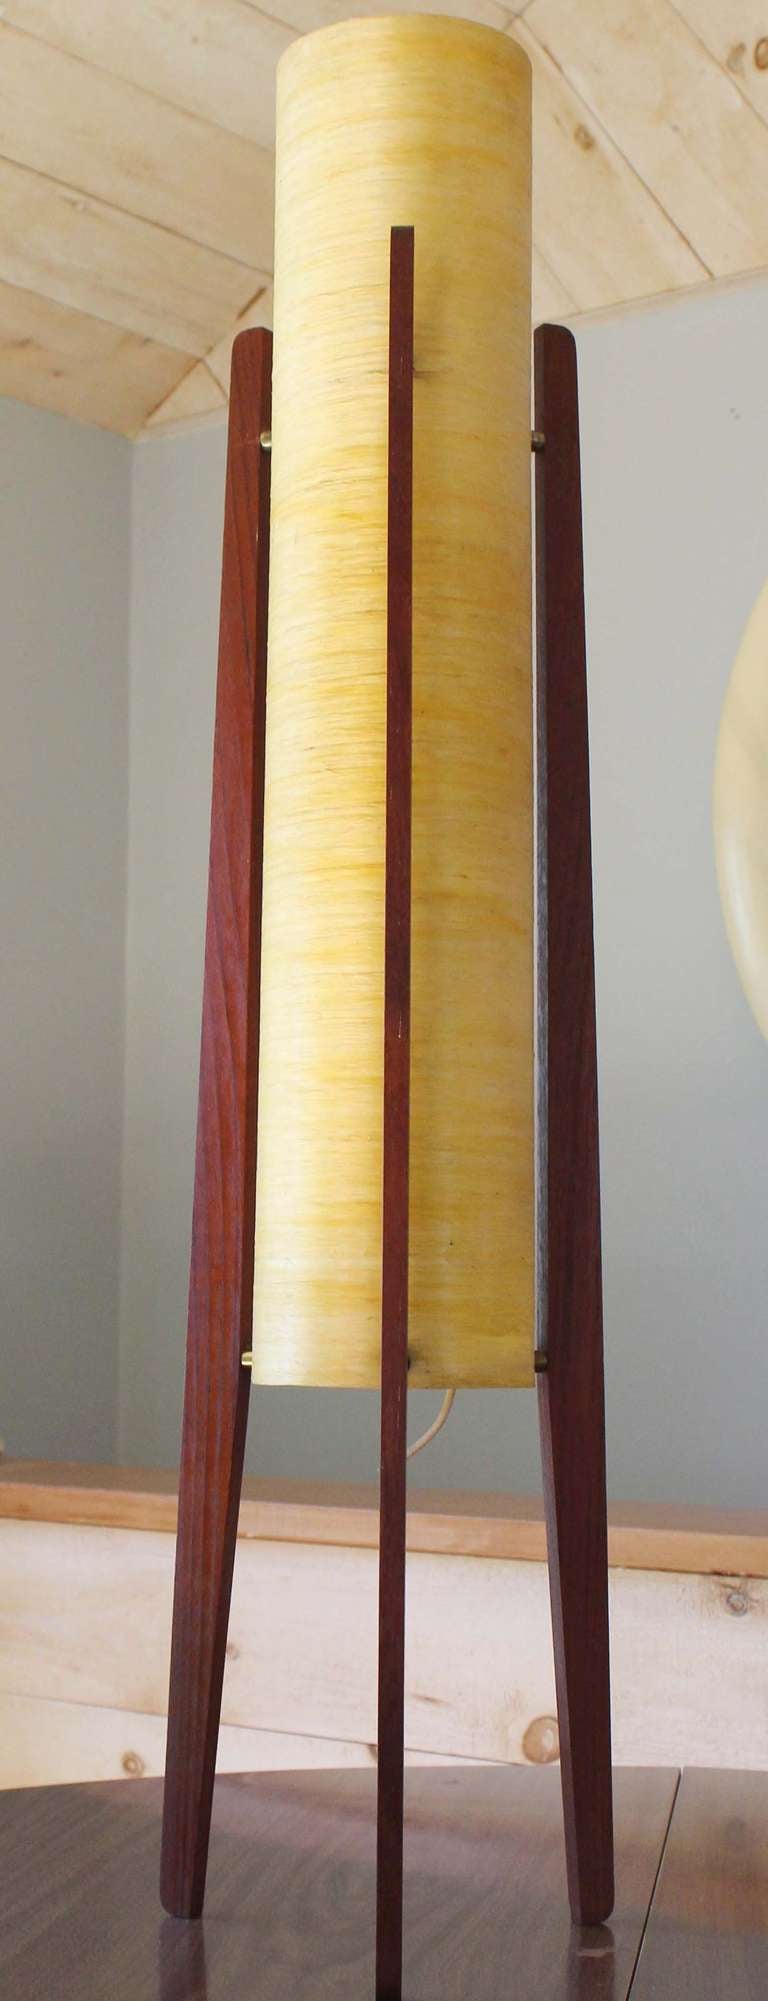 Teak frame rocket lamp with spun plastic cylinder shade and brass details.

newly wired.